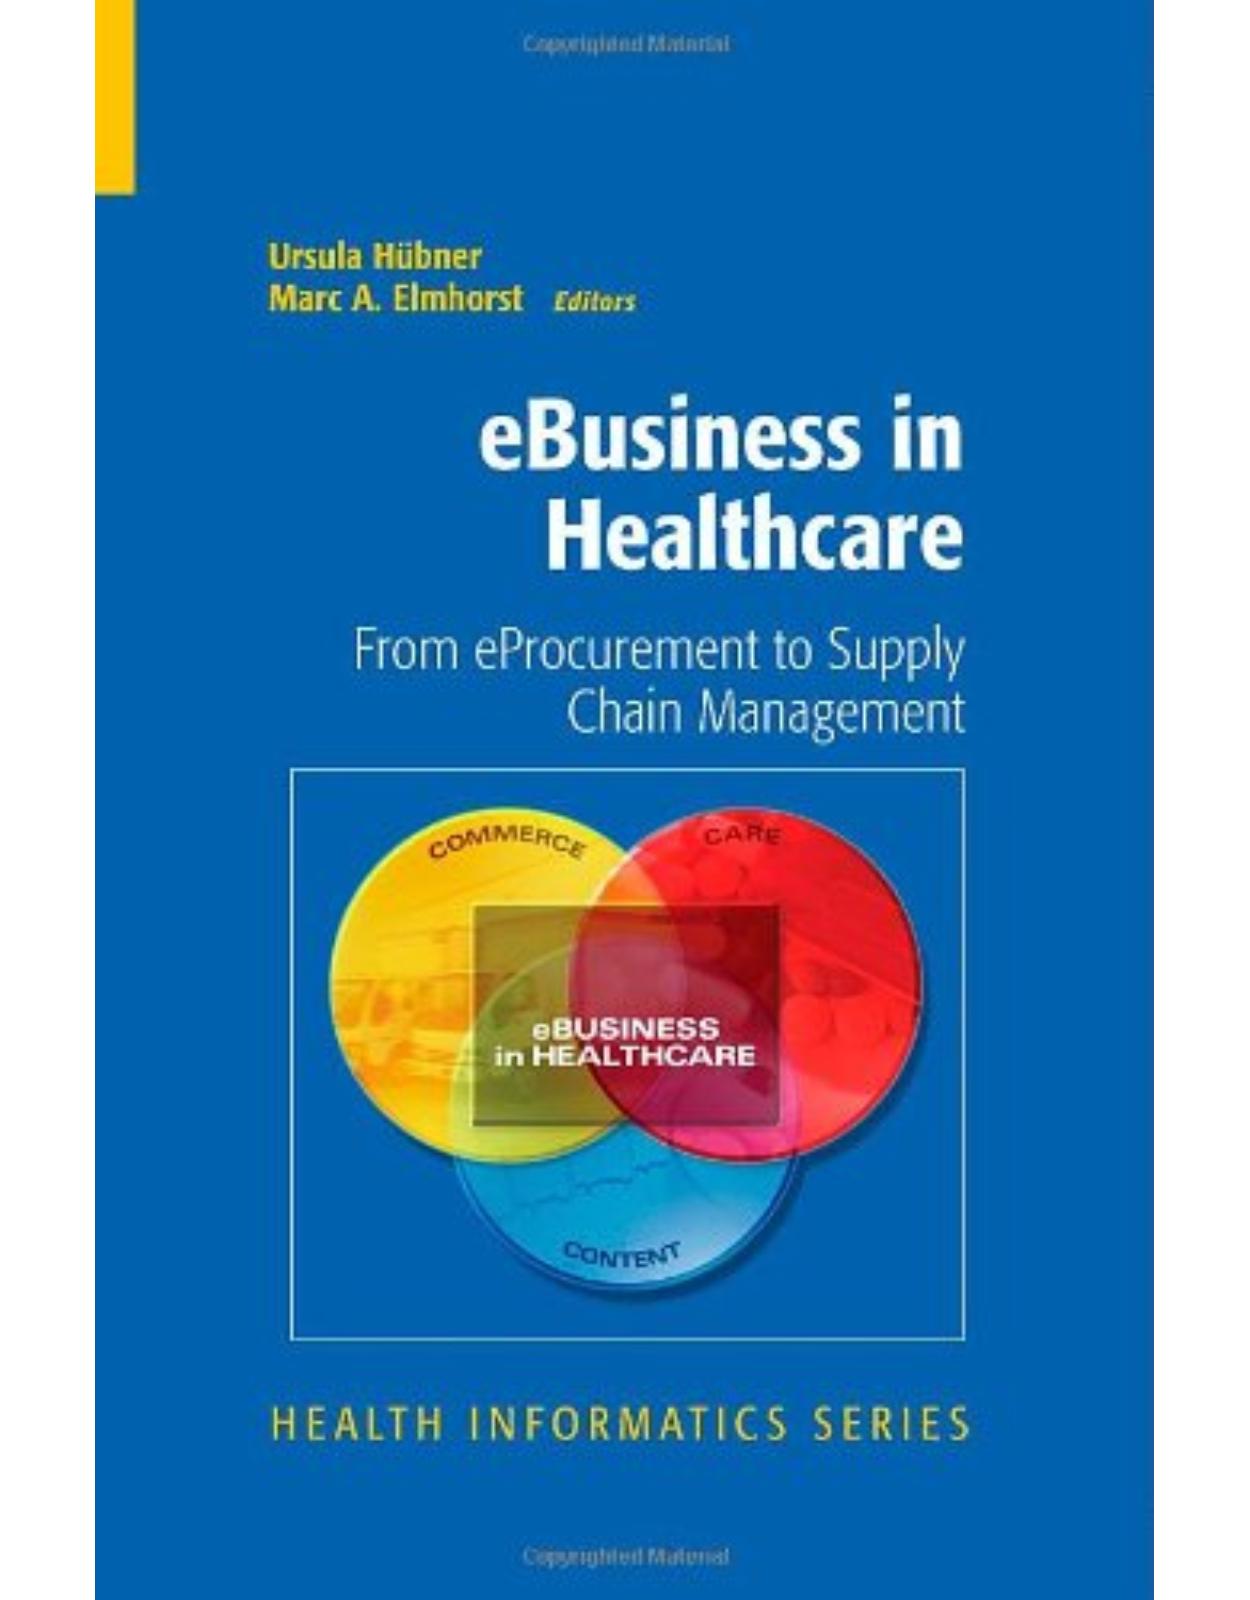 eBusiness in Healthcare: From eProcurement to Supply Chain Management (Health Informatics)